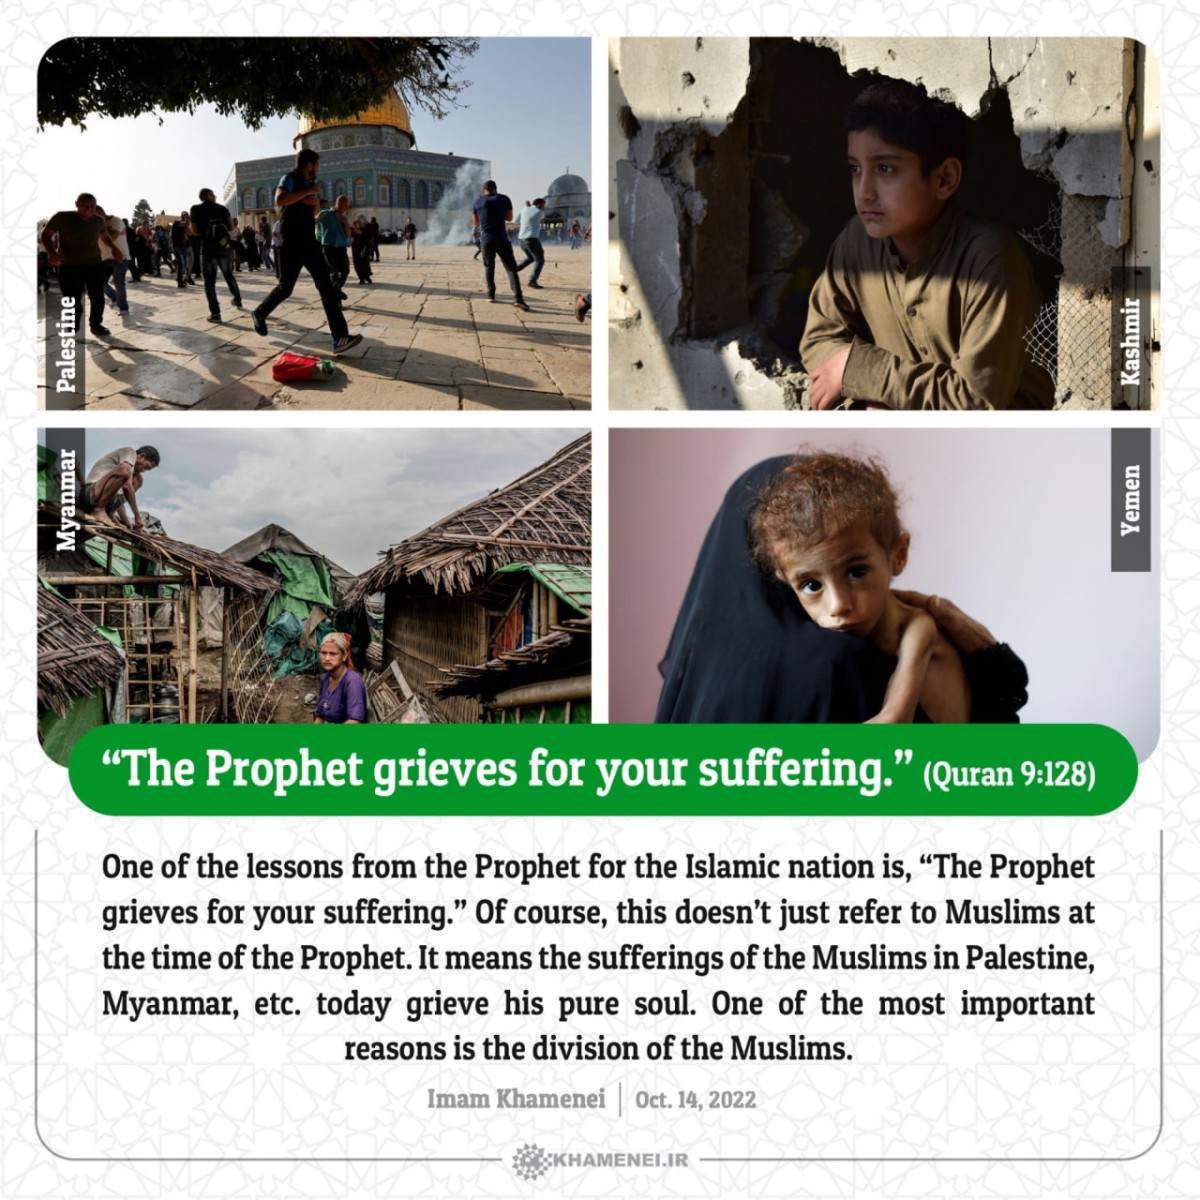 “The Prophet grieves for your suffering.” (Quran 9:128)